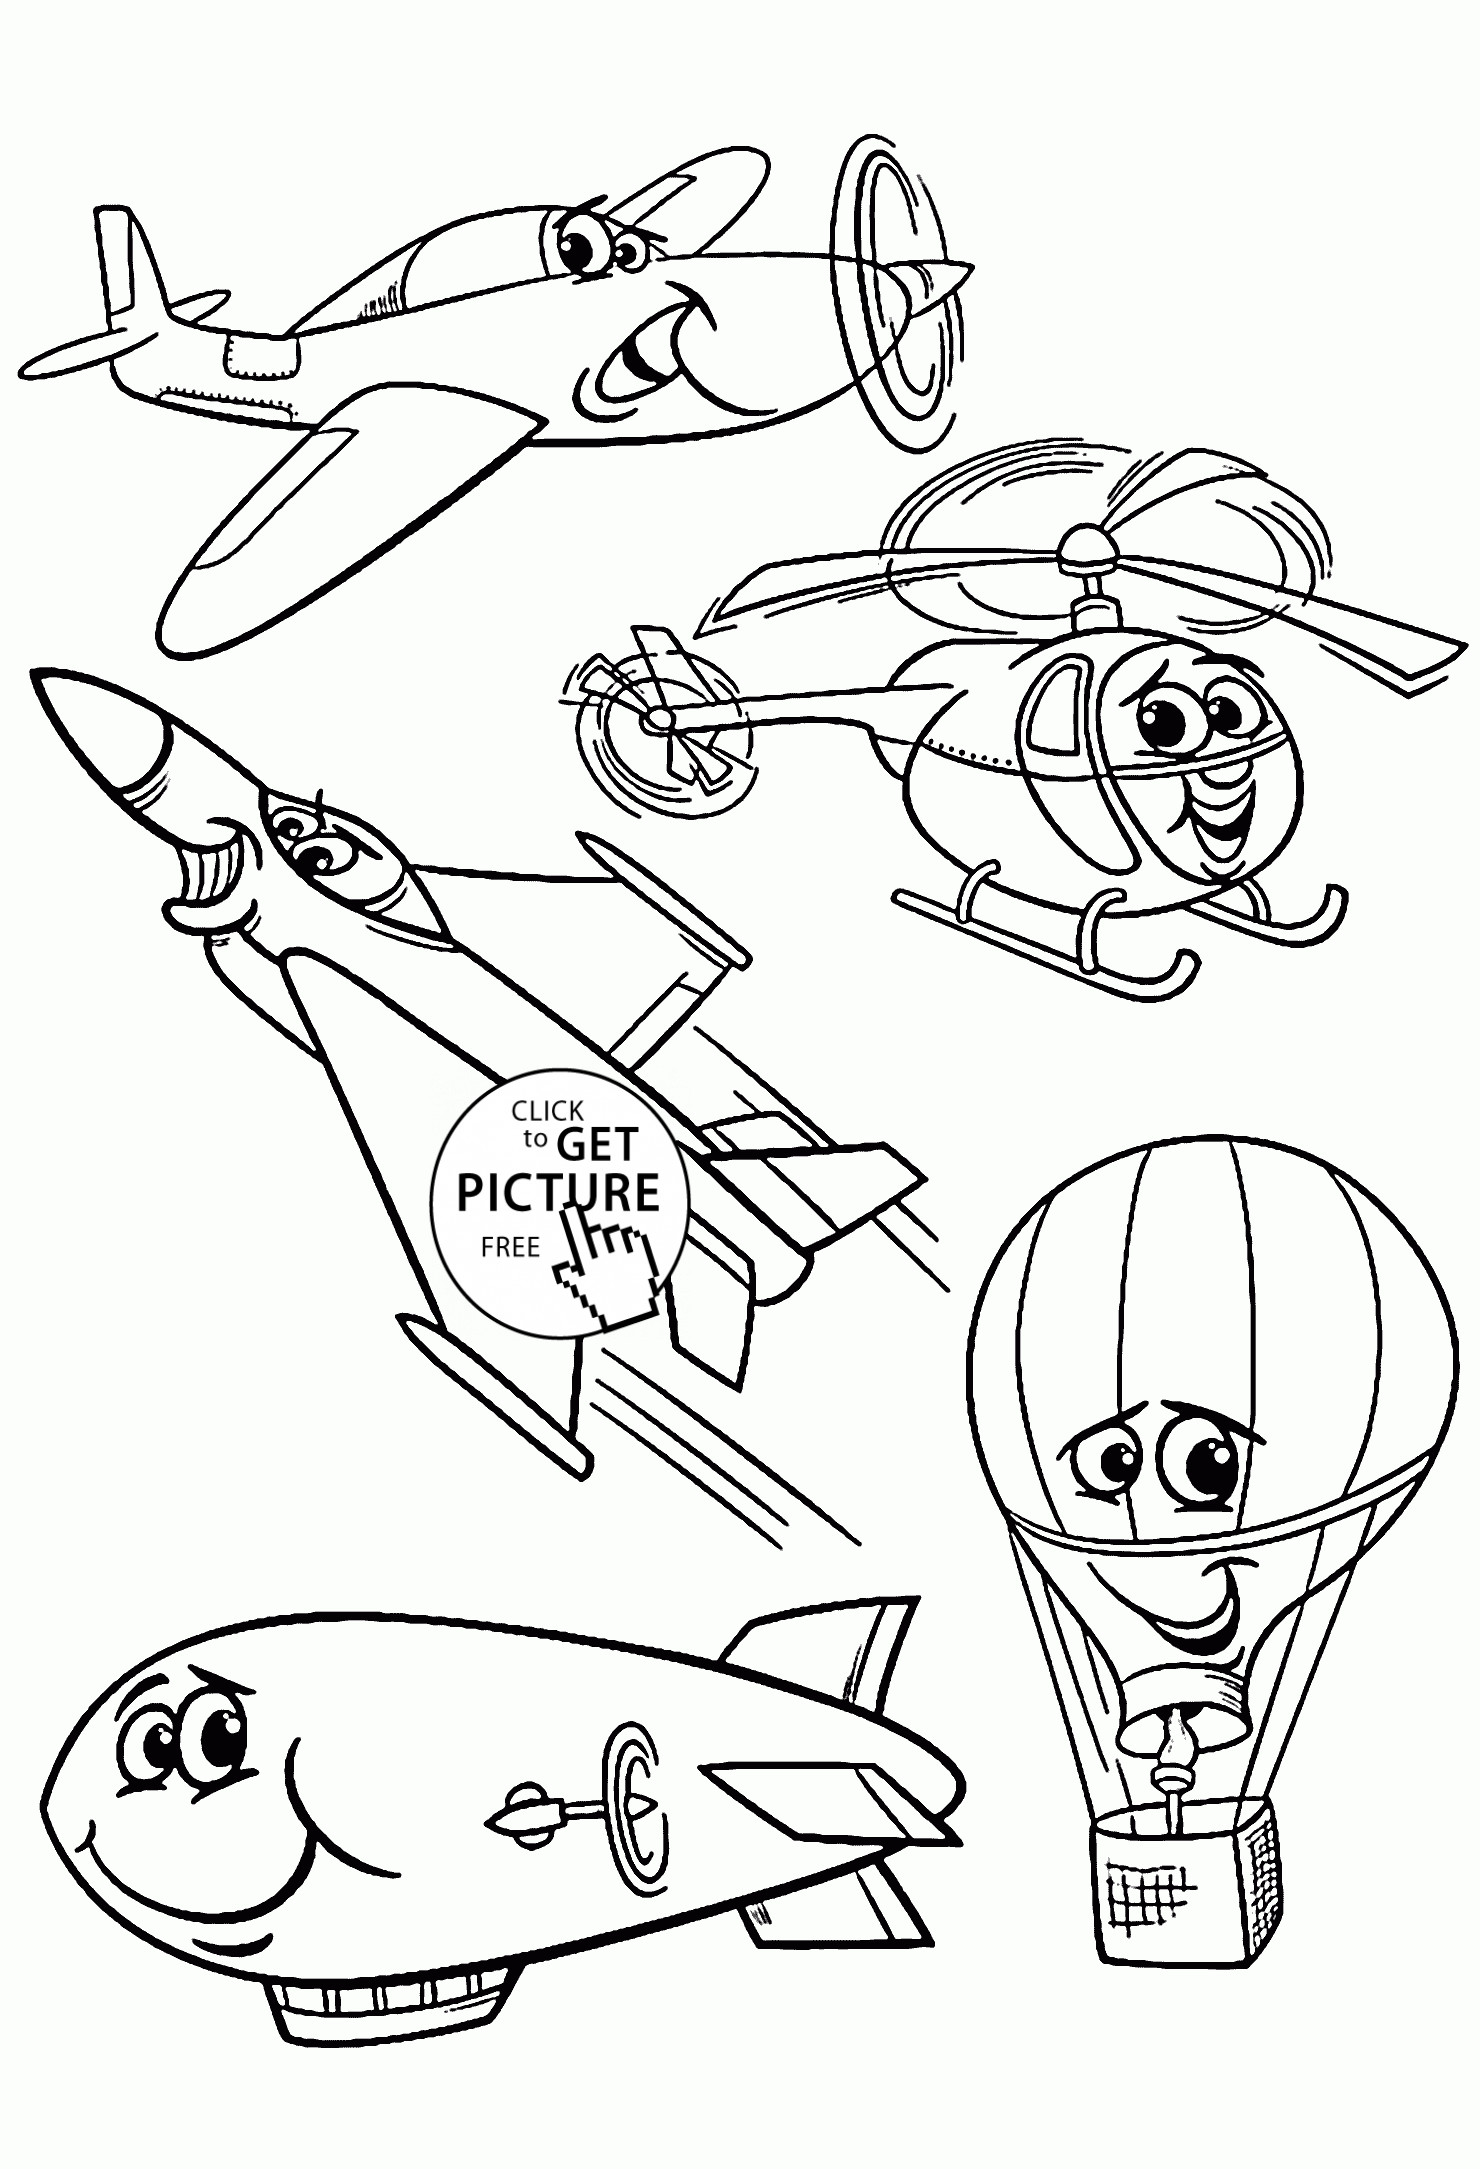 Transportation Coloring Pages For Toddlers
 Cartoon Air Vehicles coloring page for kids